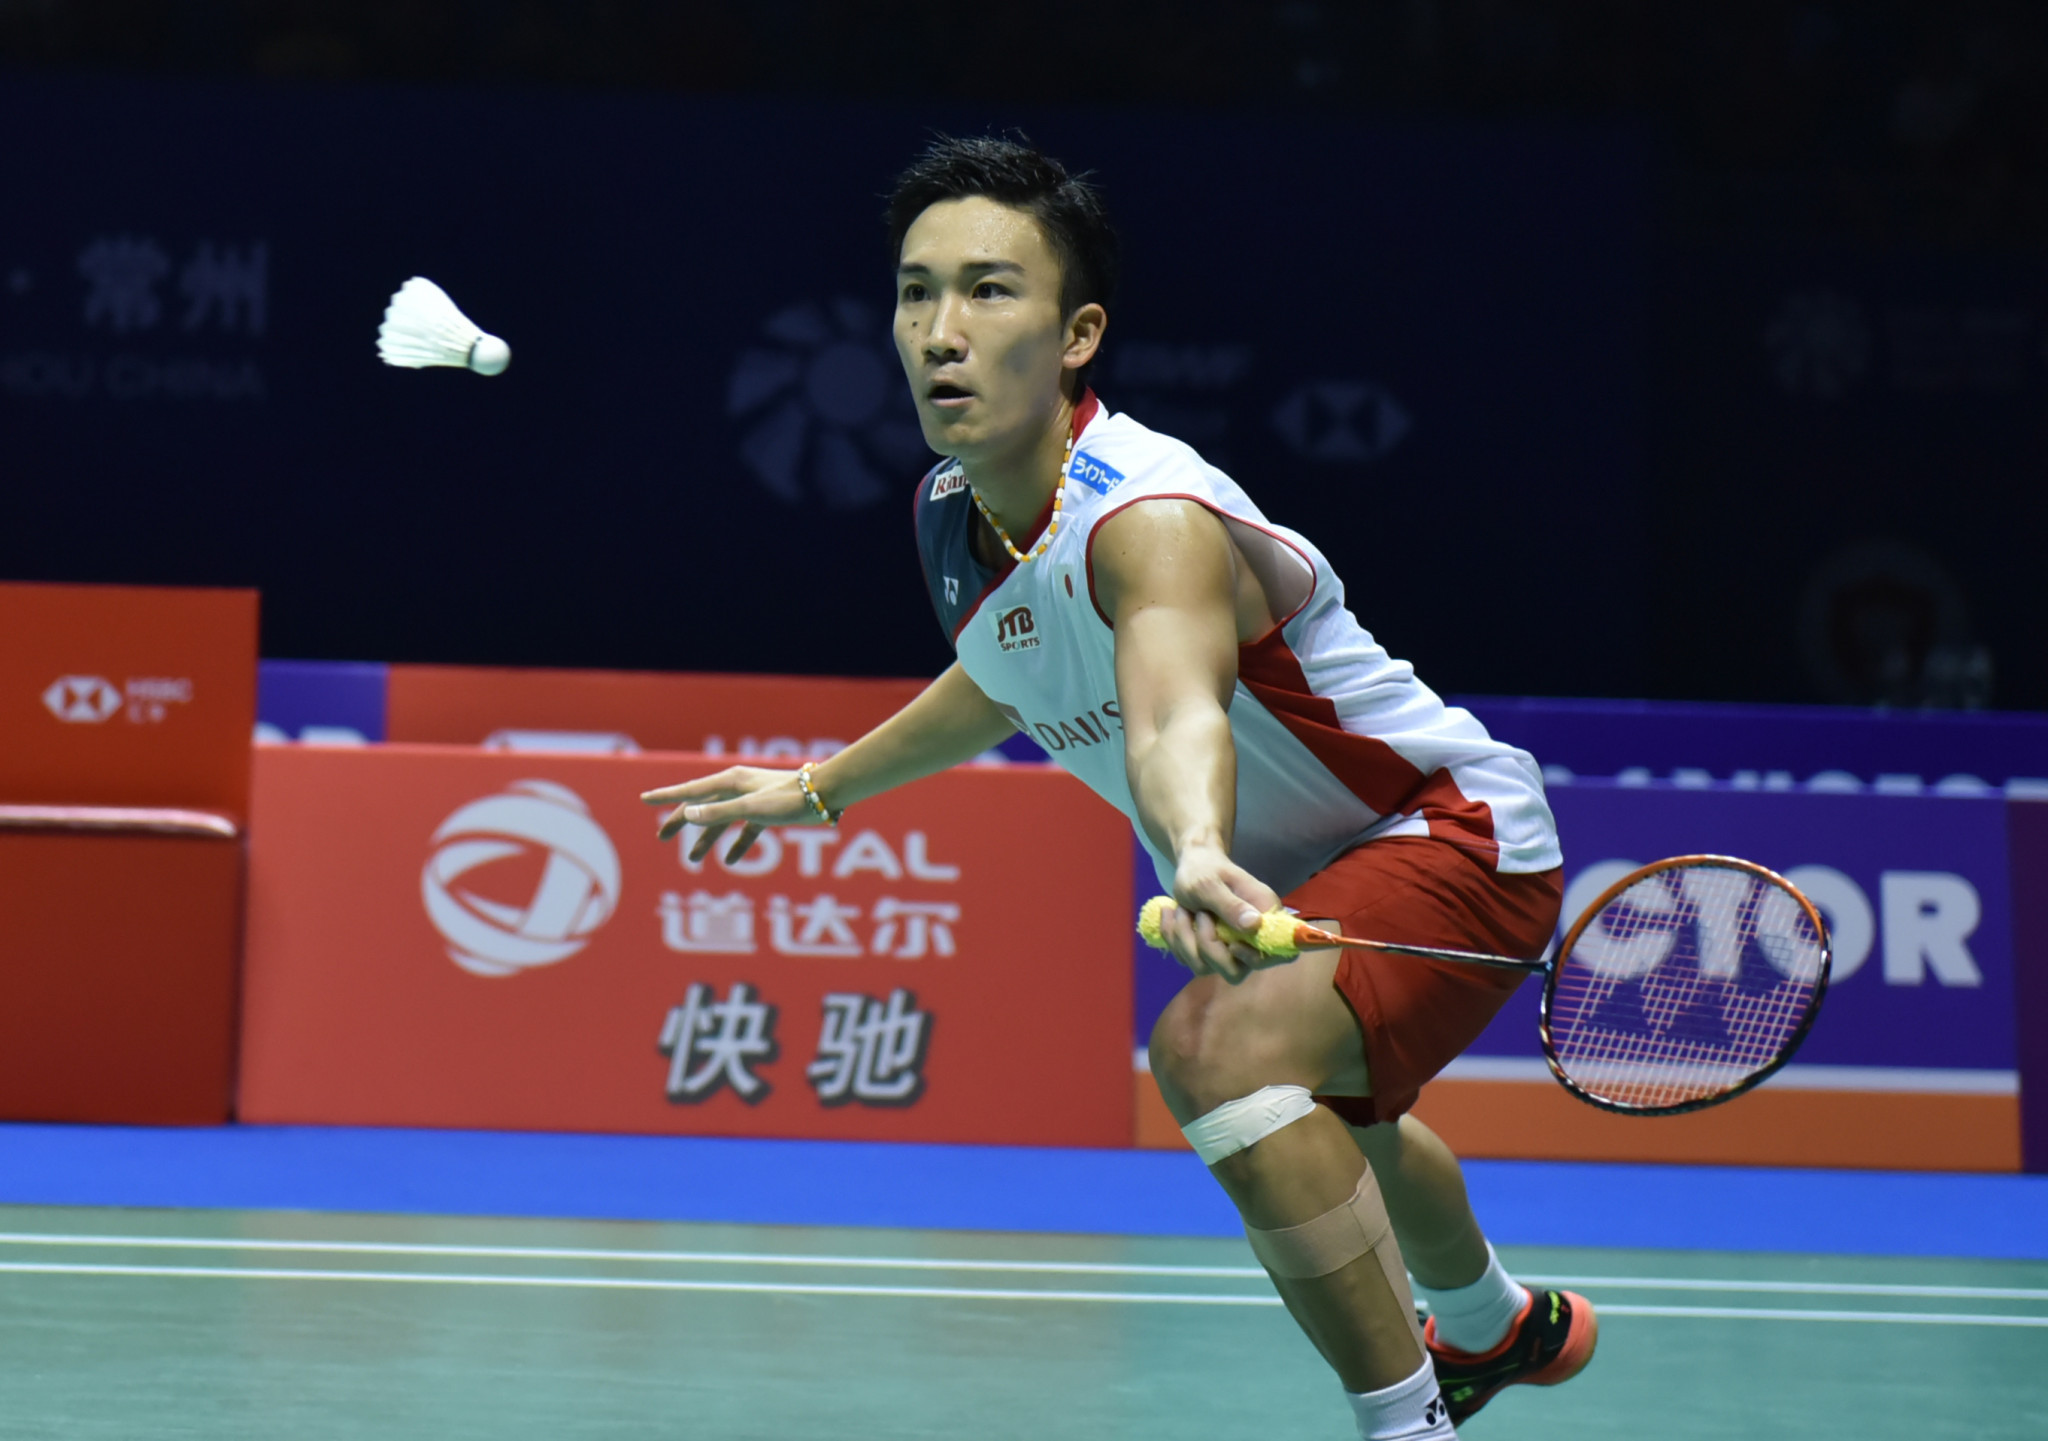 Japan's Kento Momota has earned a place in the second round of the Badminton World Federation Denmark Open ©Getty Images